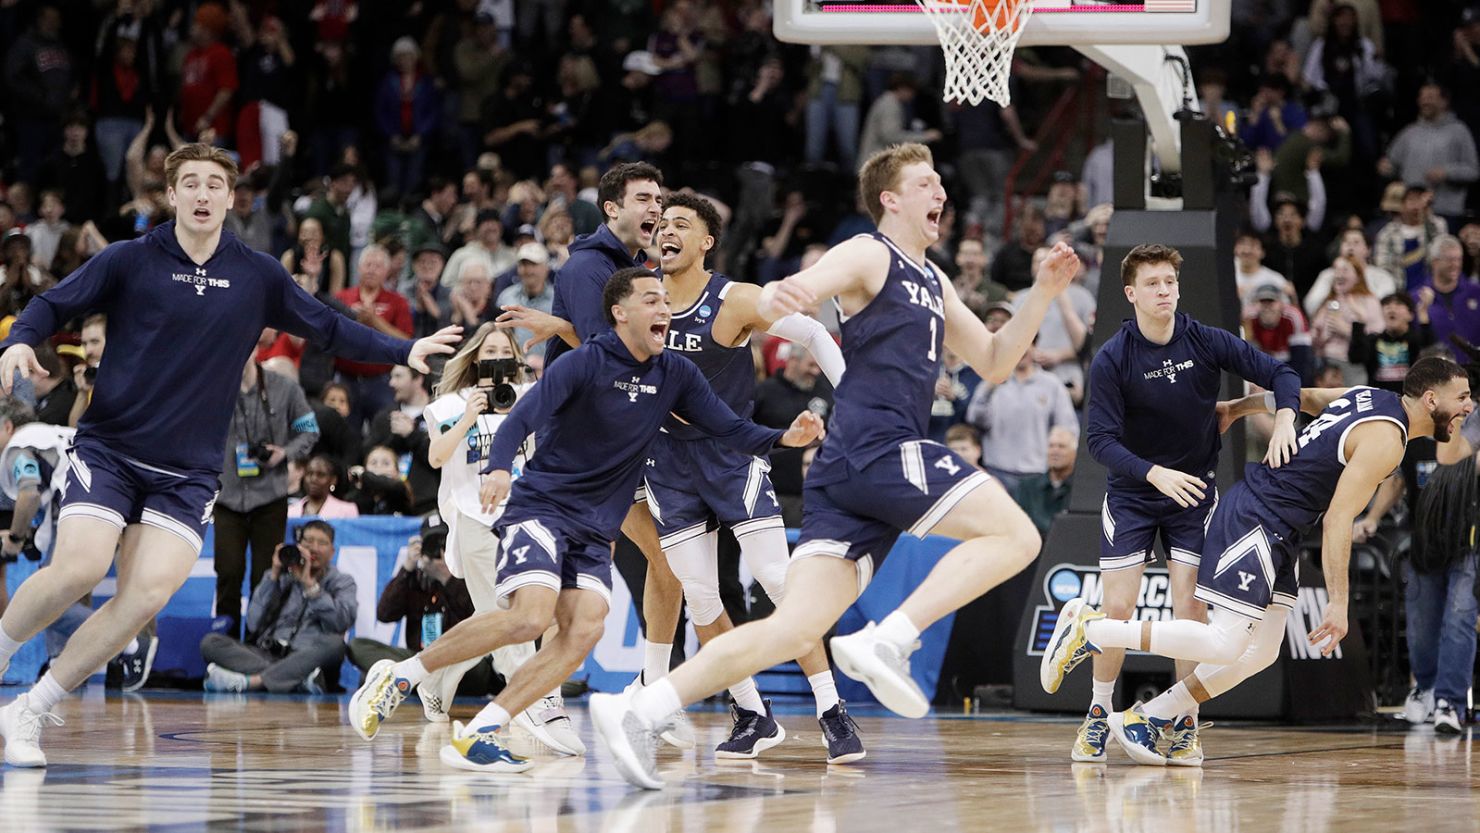 Yale players celebrate after their win over Auburn in the first round of the NCAA men's basketball tournament in Spokane, Washington on March 22, 2024.